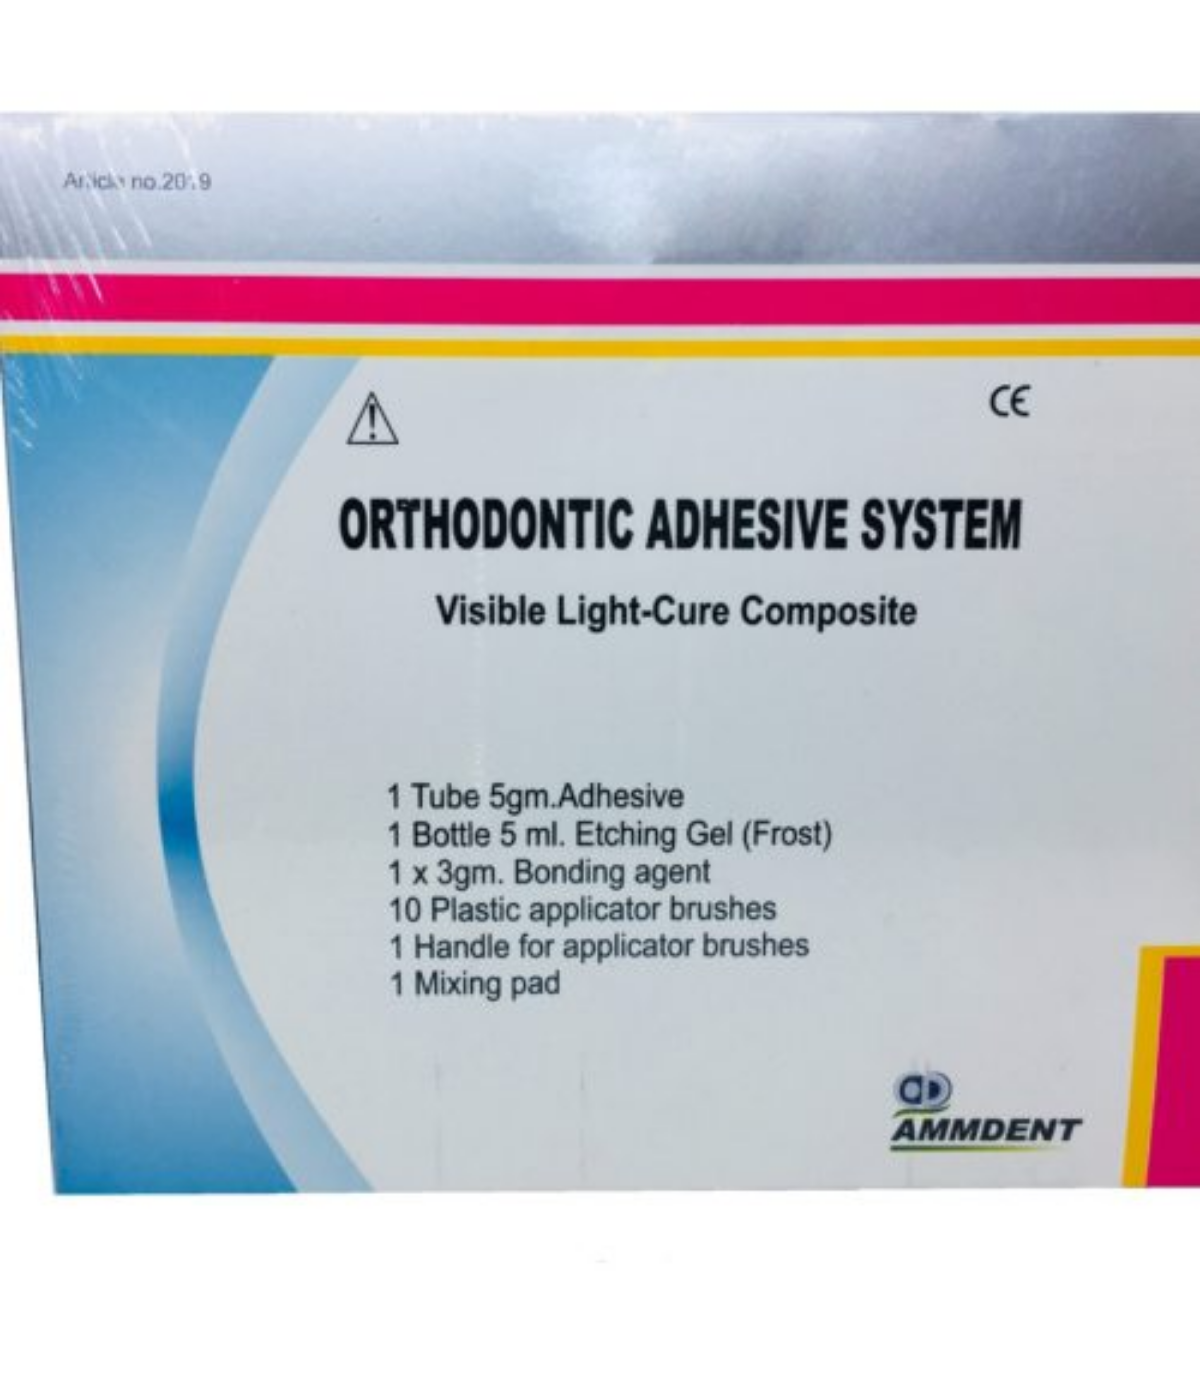 Ammdent Orthodontic Adhesive Light Cure Composite Kit